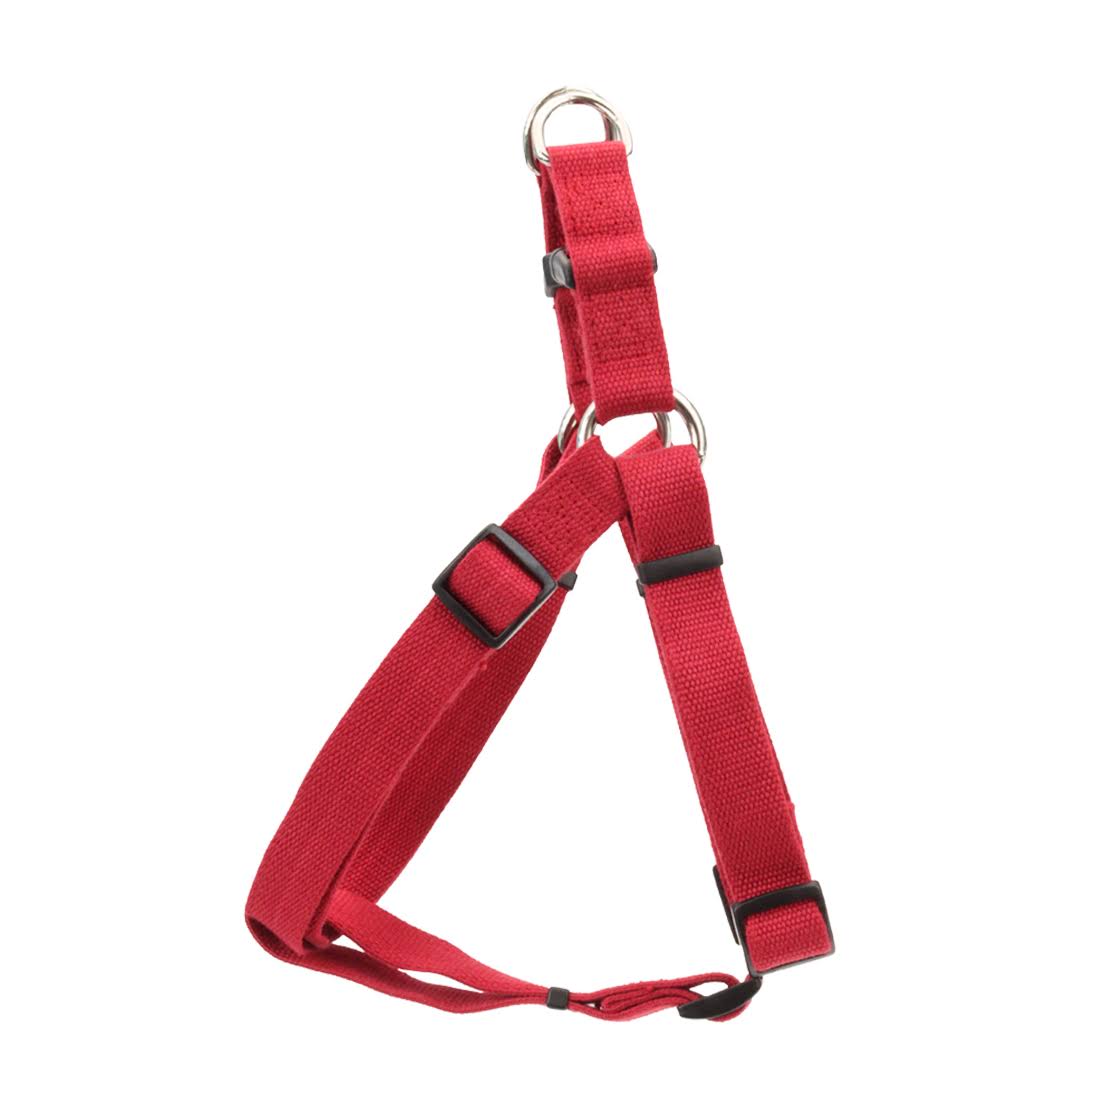 New Earth Soy Comfort Wrap Adjustable Dog Harness, Cranberry, 3/8-in X 12-18-in